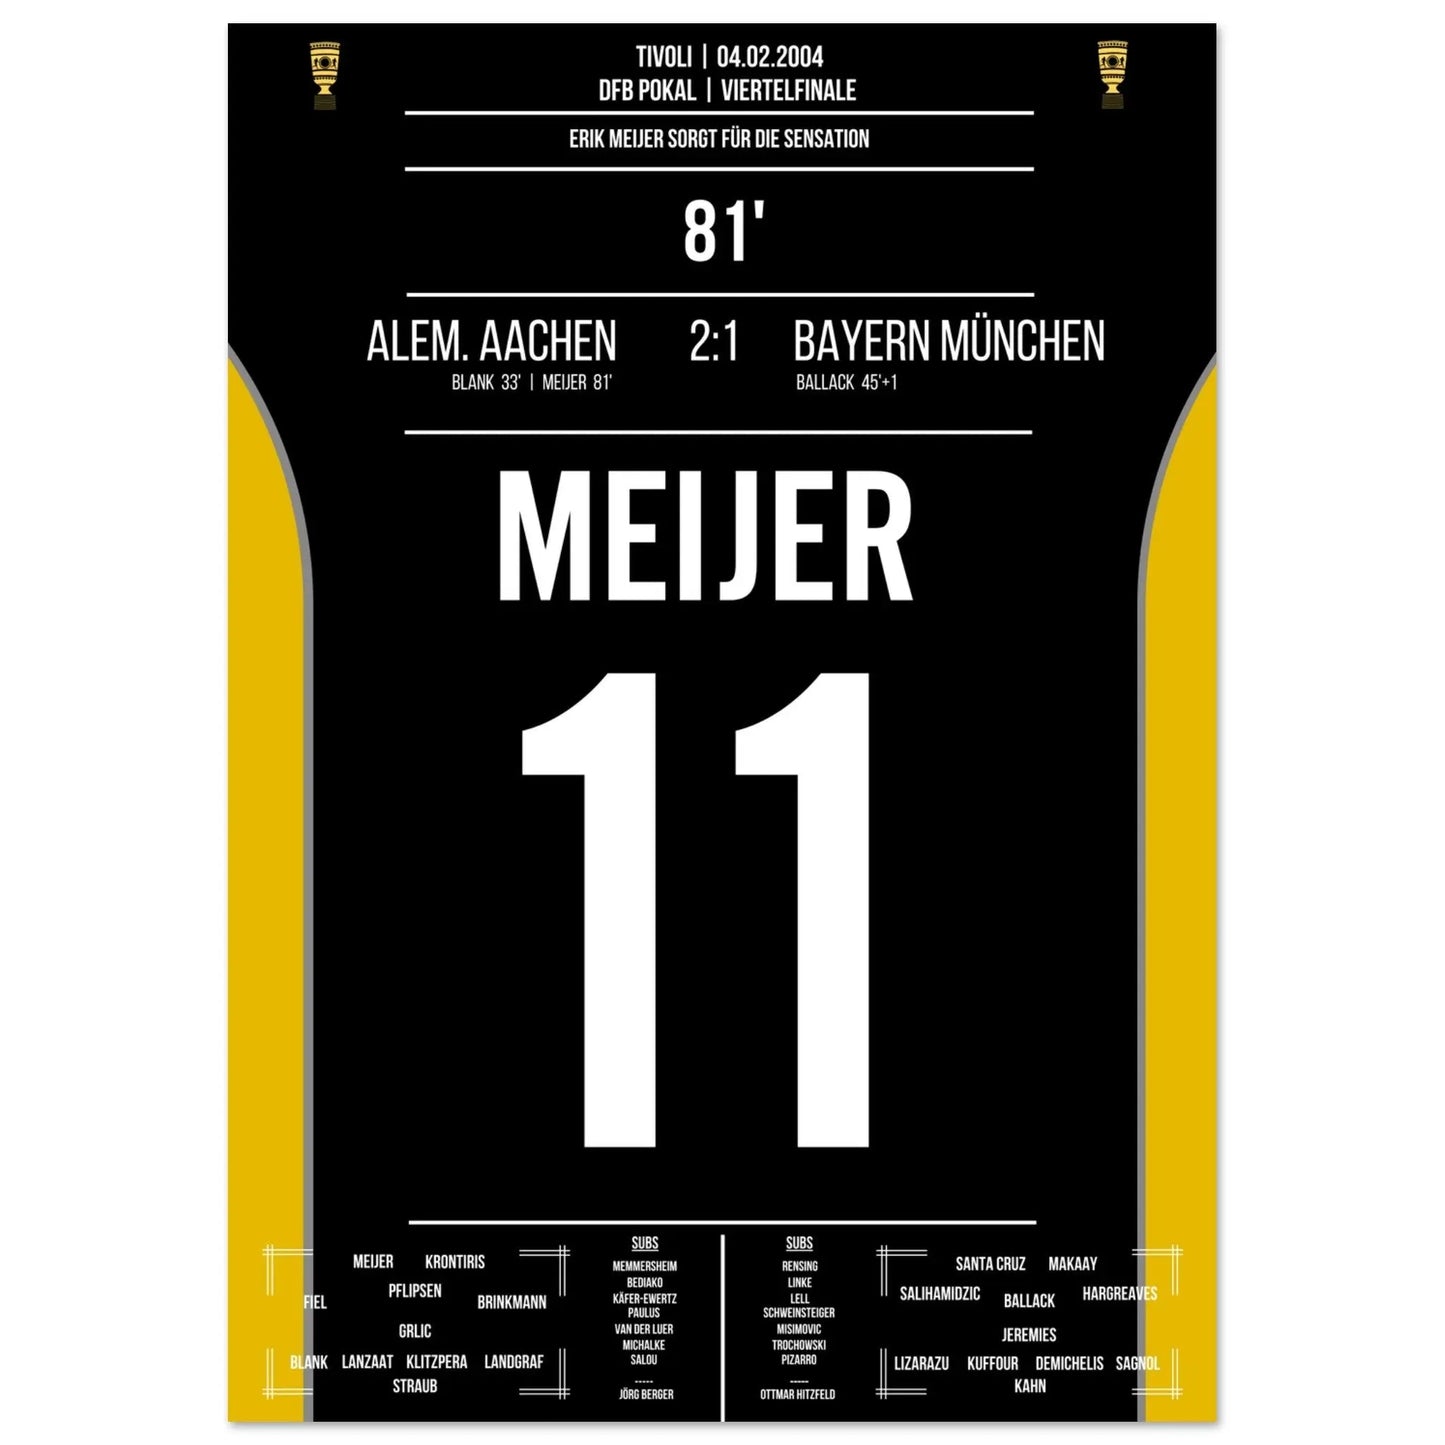 Meijer heads Aachen to a cup sensation against Bayern in 2004